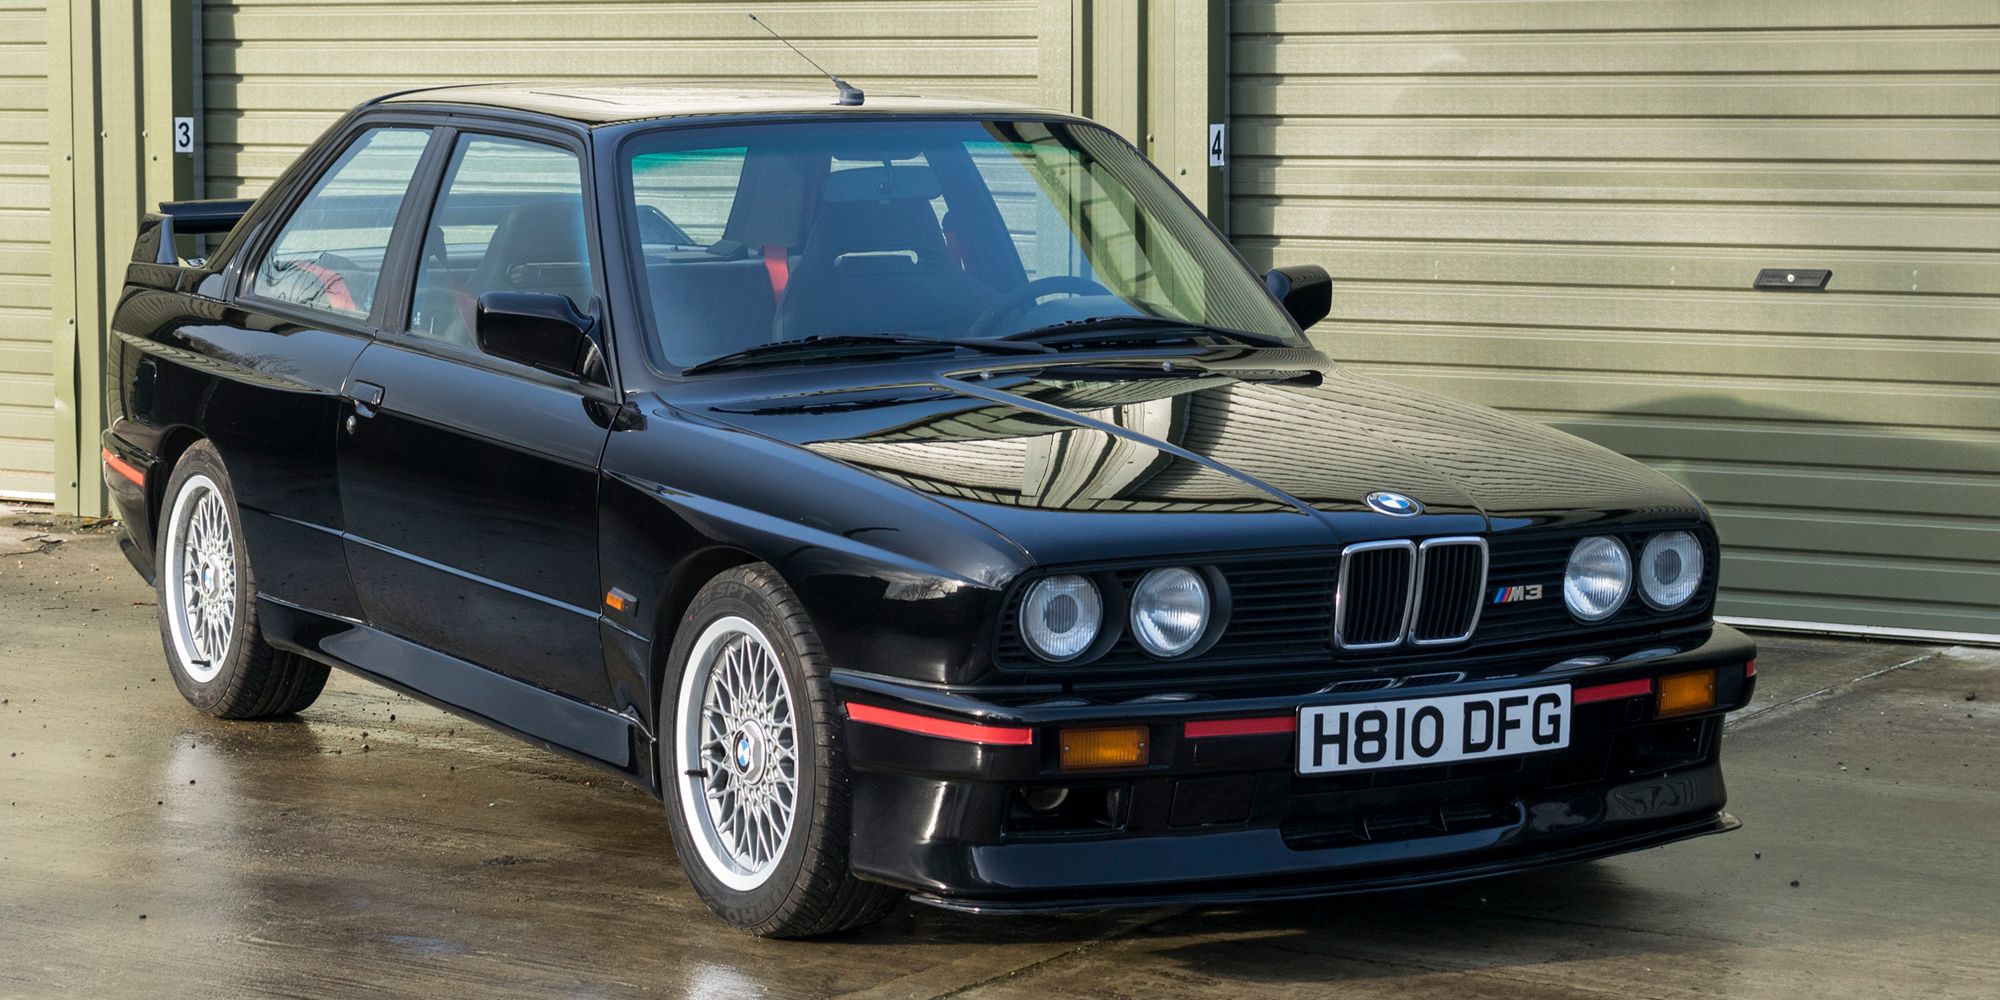 The front of the E30 M3